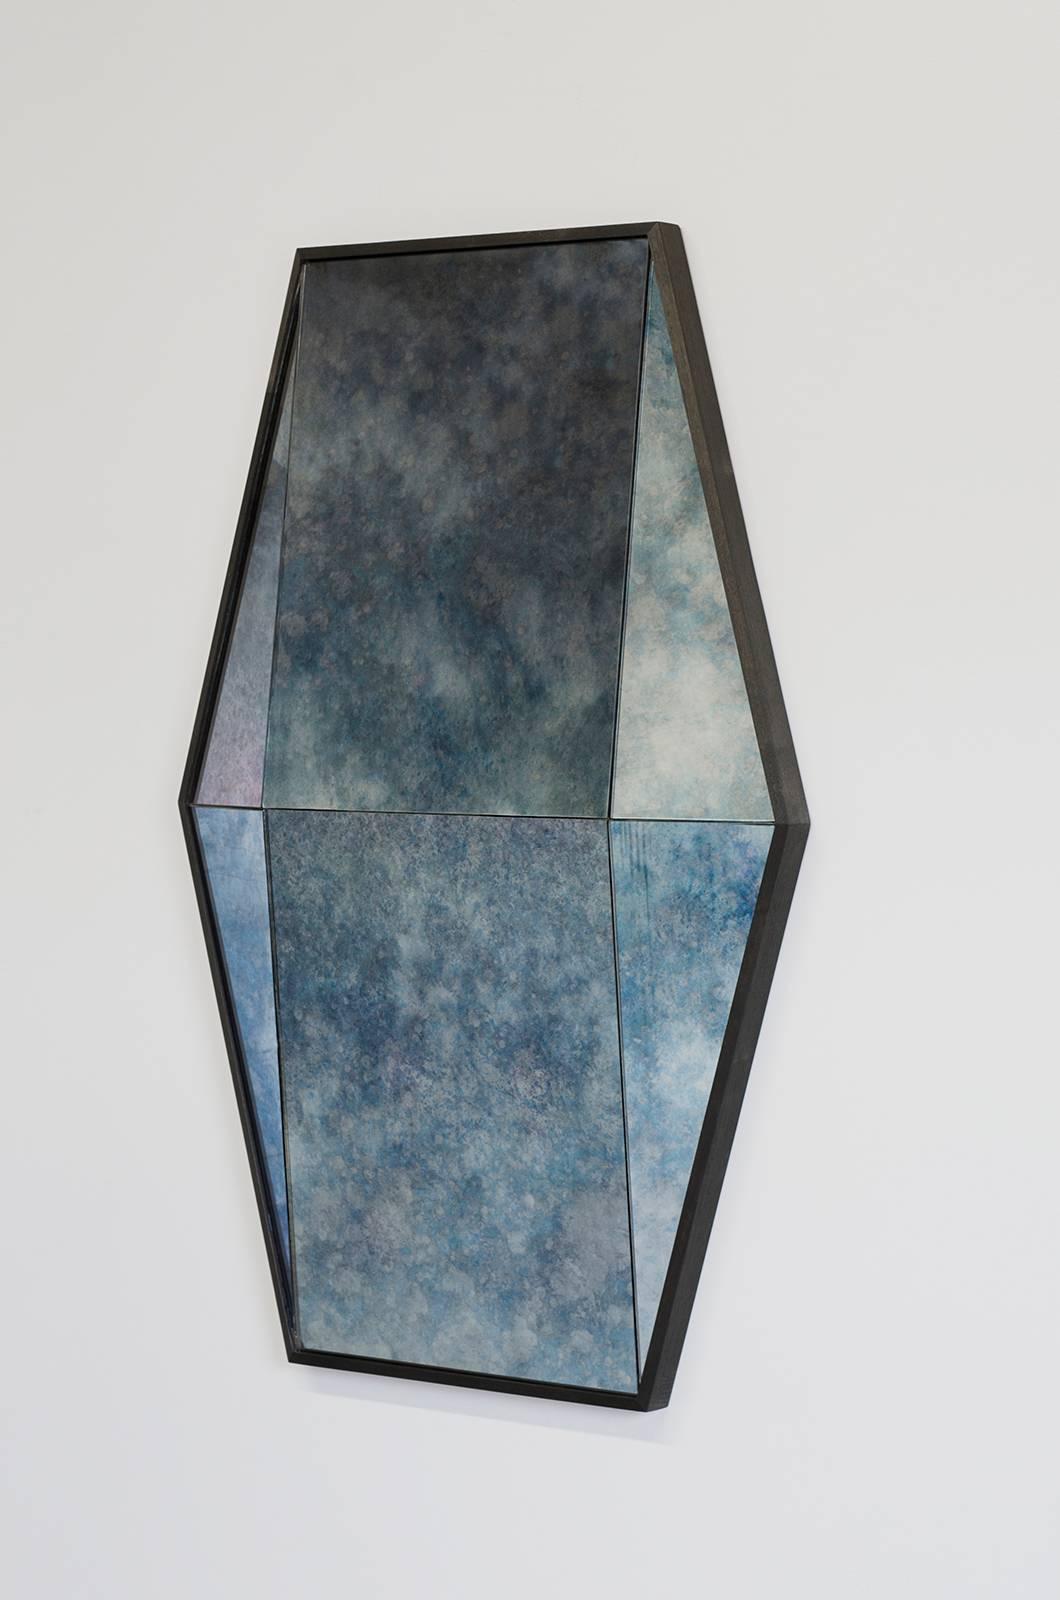 The Gem mirror is built in antique cobalt blue mirror glass, with an ebonized walnut frame.

Built in colored mirror with a hardwood frame, the Gem mirror offers a bold reflective surface. Six faceted panes of glass are a trick to the eye - walk